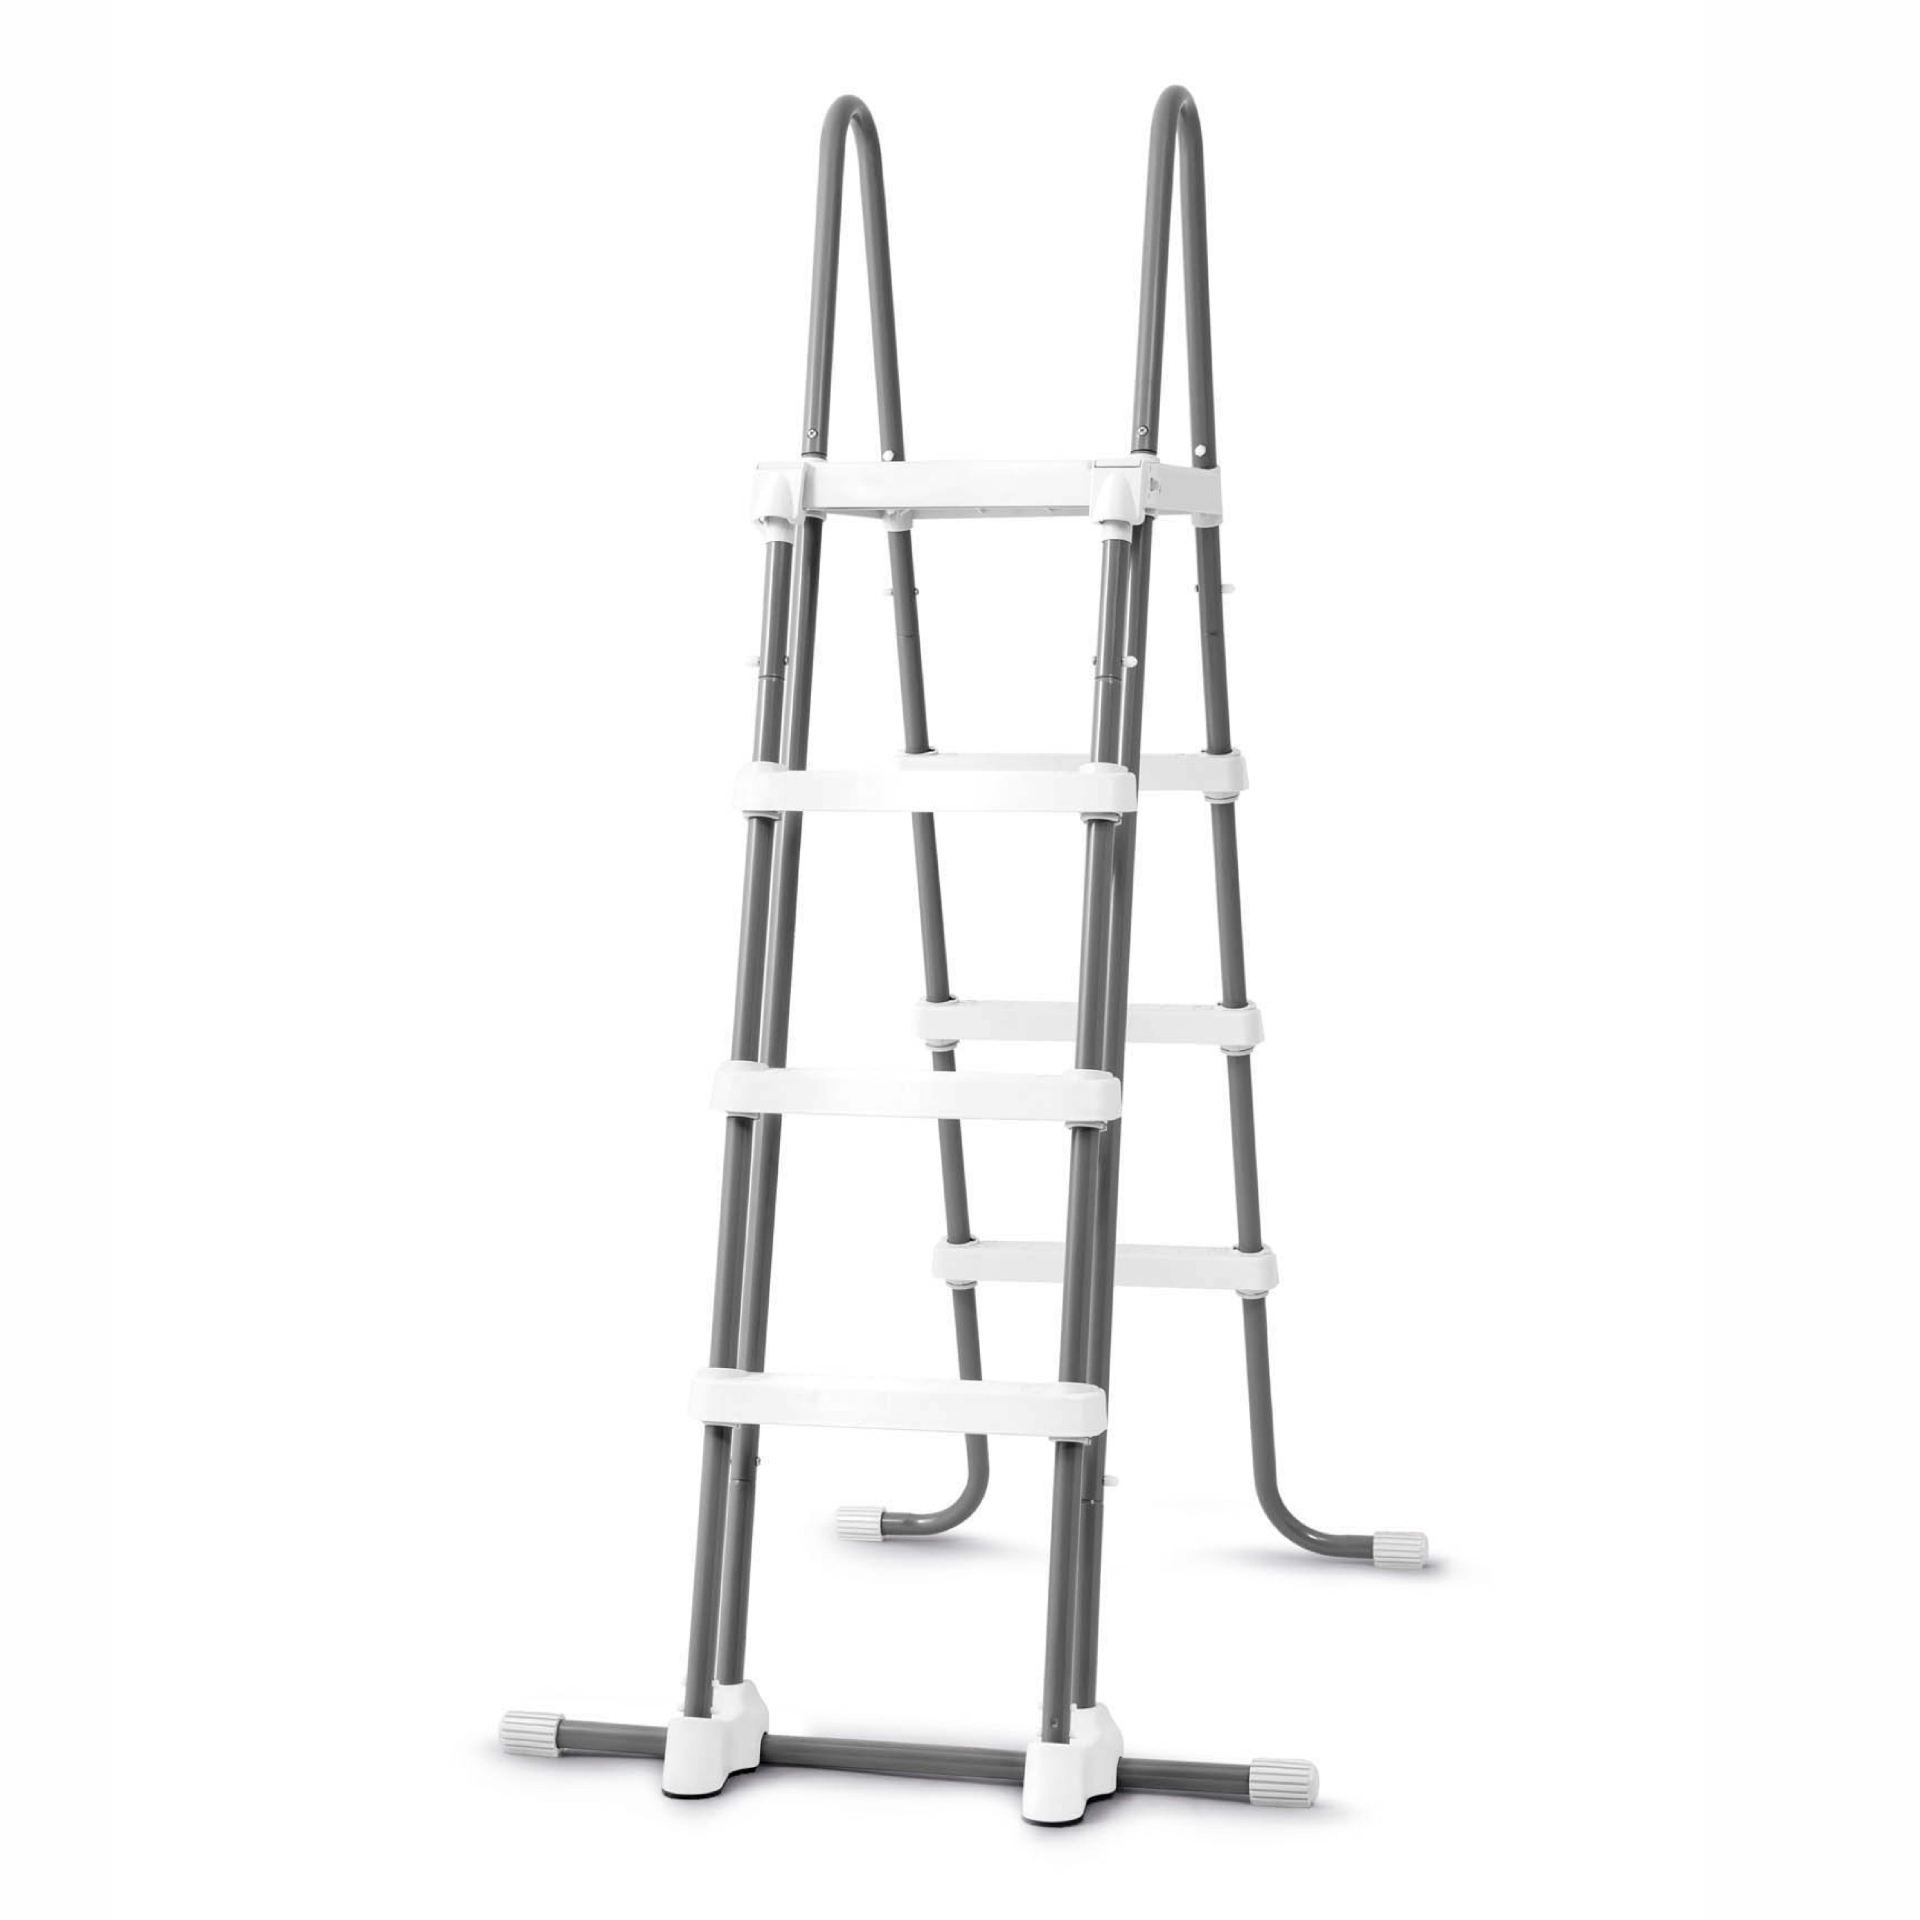 Intex Pool ladder with removable steps 122cm